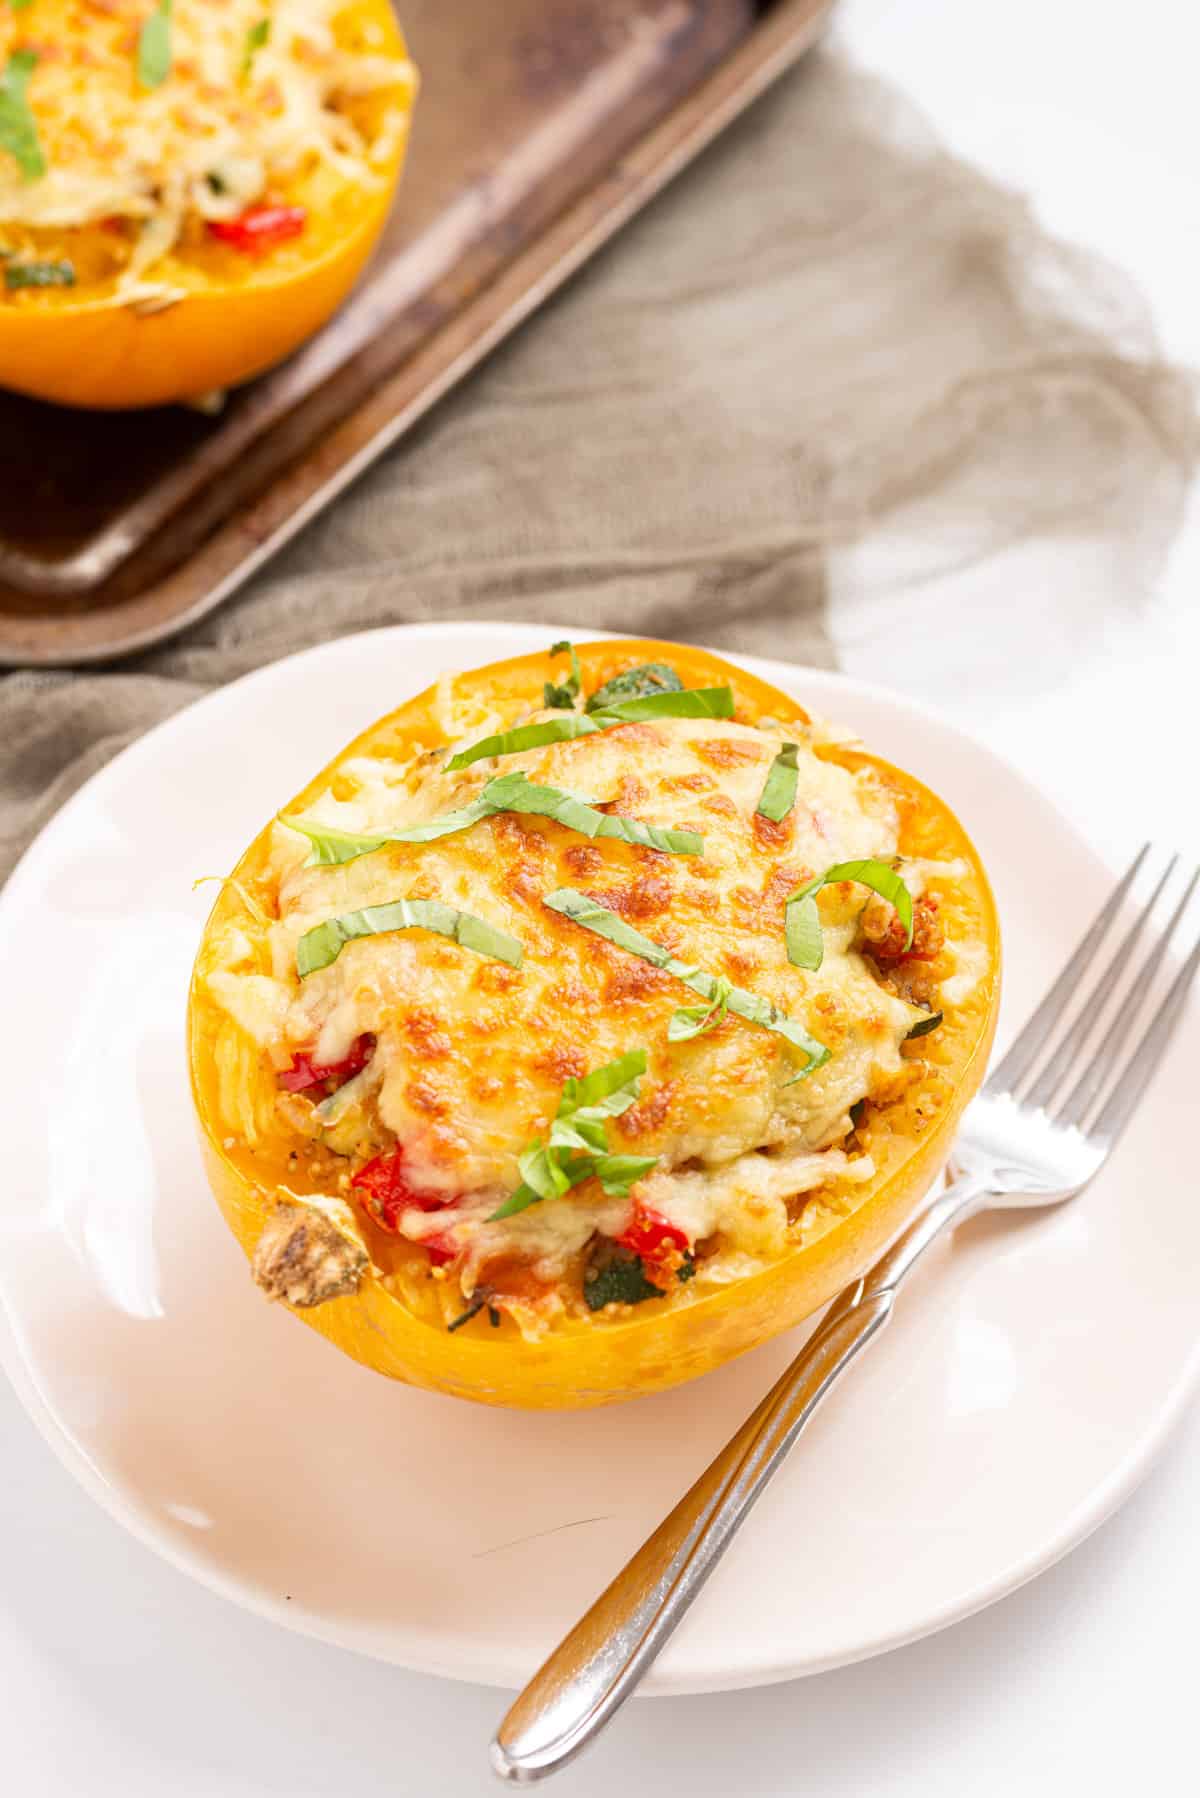 An image of stuffed spaghetti squash served on a white plate with a silver fork on the right side of it.